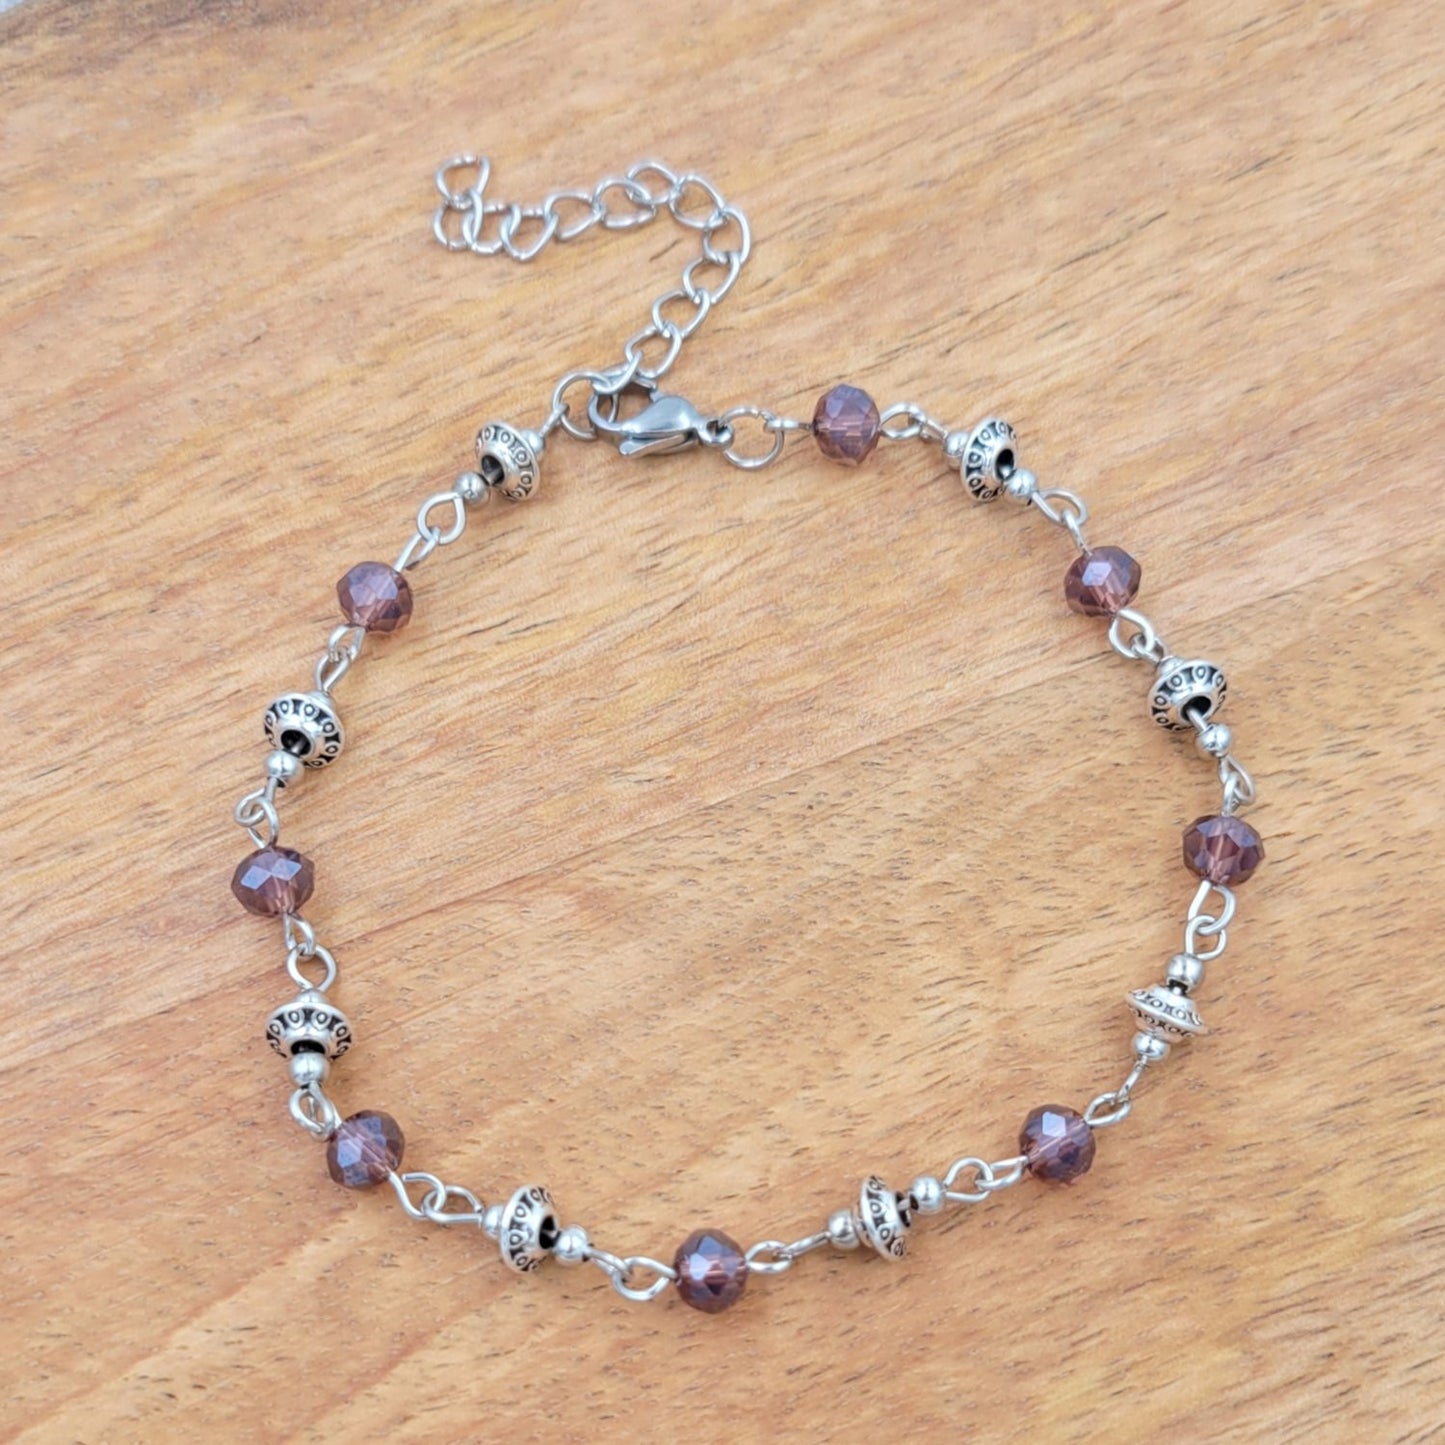 BESHEEK Silvertone DARK PURPLE Faceted Crystal Chain Artisan Beaded Anklet with Extension | Handmade Hypoallergenic Beach Gala Wedding Style Jewelry